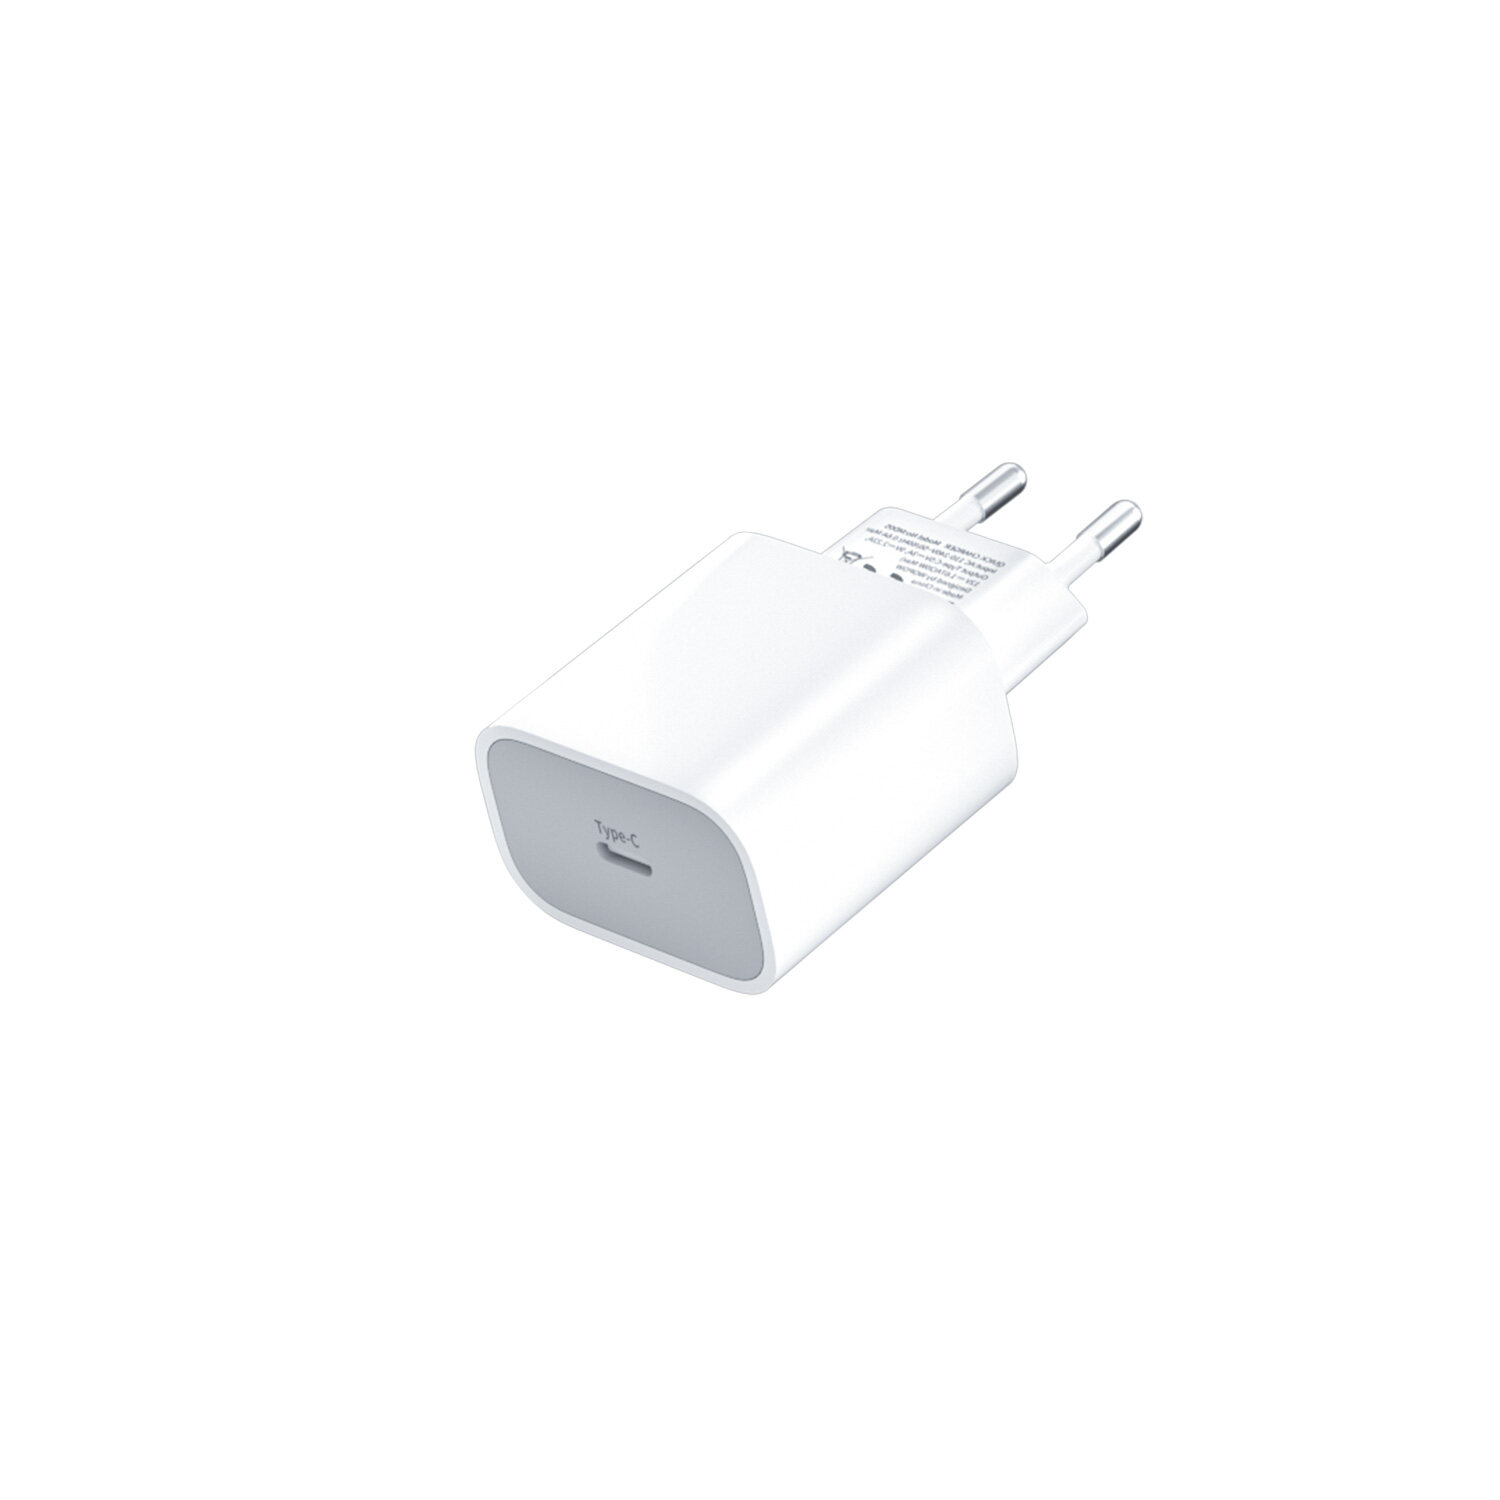 eu 20w pd quick charger oem, pd 30w quick charger, qc3.0+pd quick charger, quick charge usb pd, eu 20w pd quick charger dealer